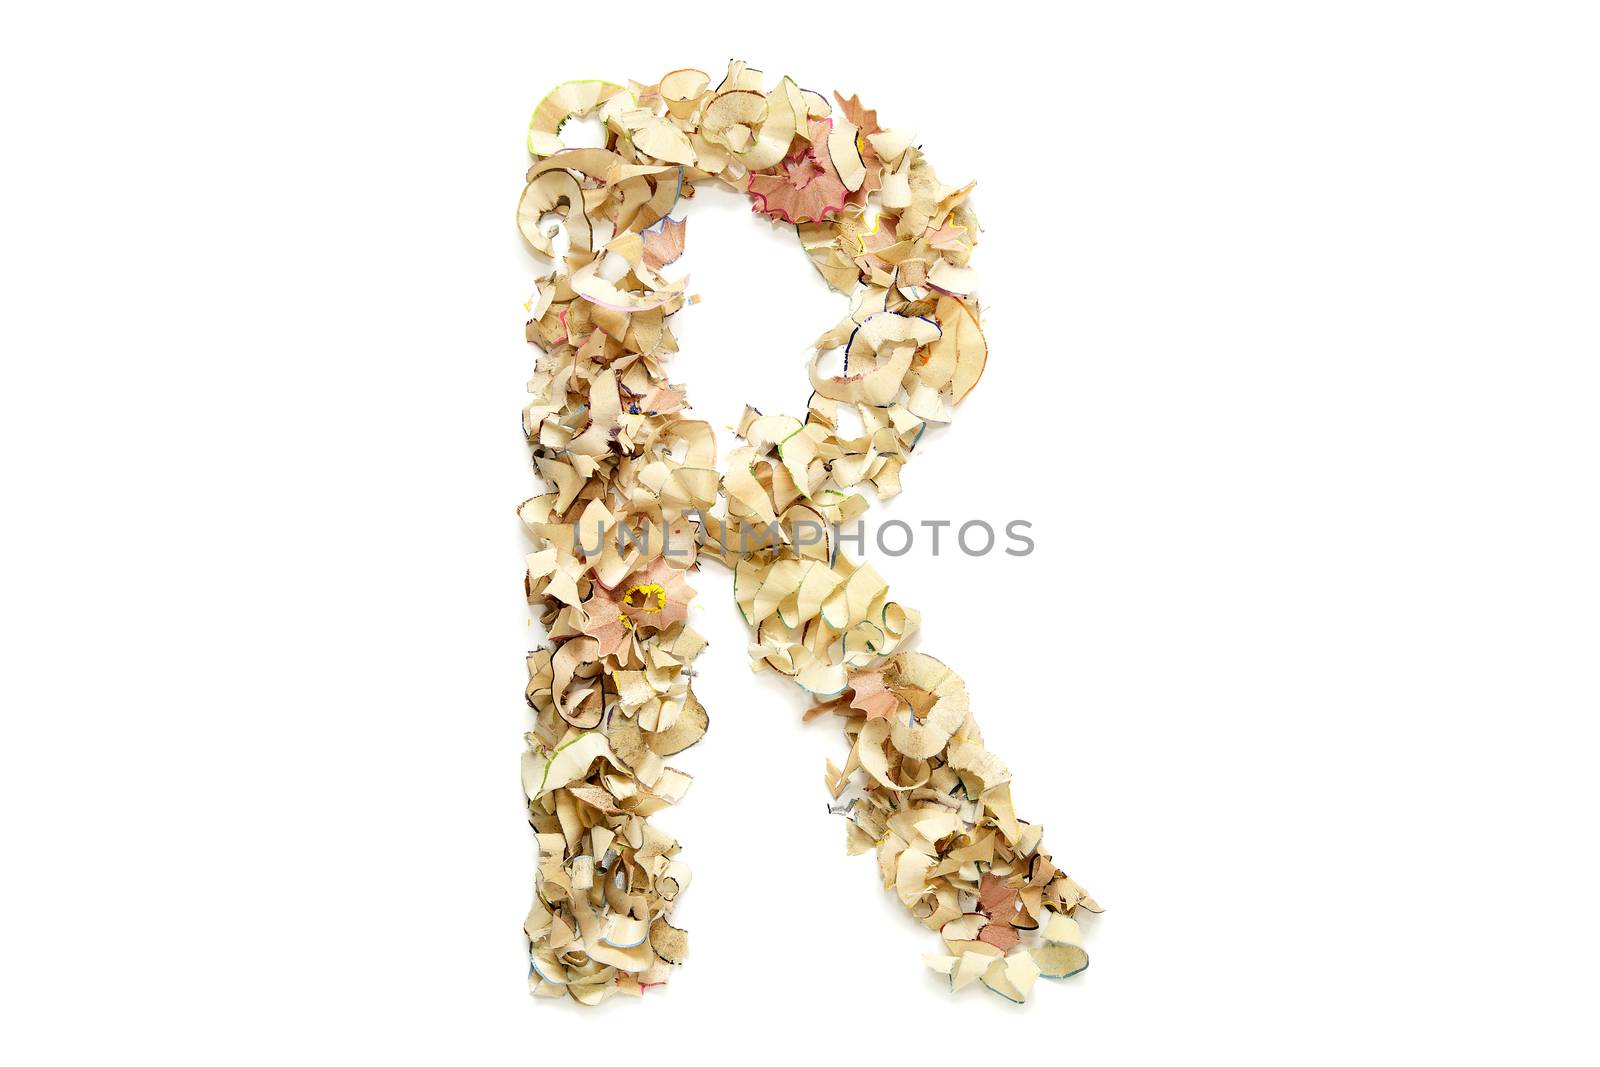 Letter R made from coloured pencil shavings for use in your design.